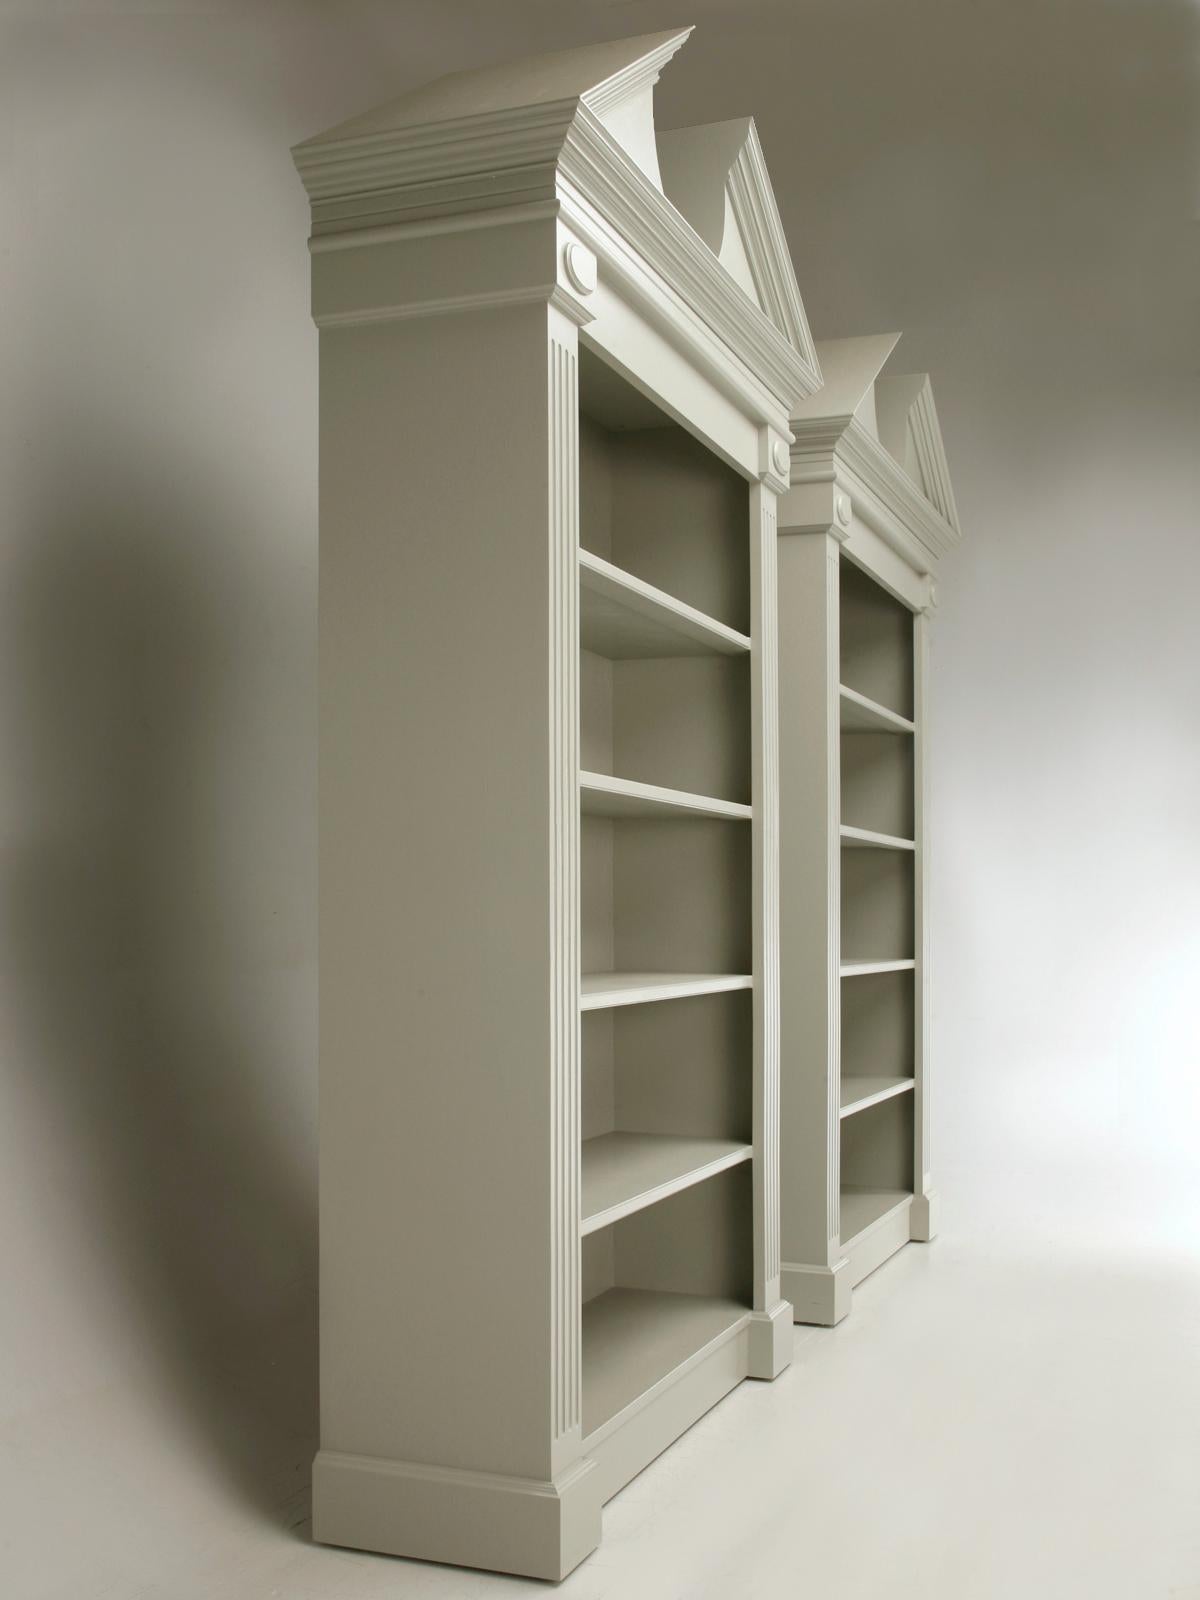 A stunning pair of custom bookcases made right here at our Old Plank workshop. These broken pediment handmade custom bookcases can be reproduced in any size and color and are made on-site with every attention to detail. Priced as a pair.